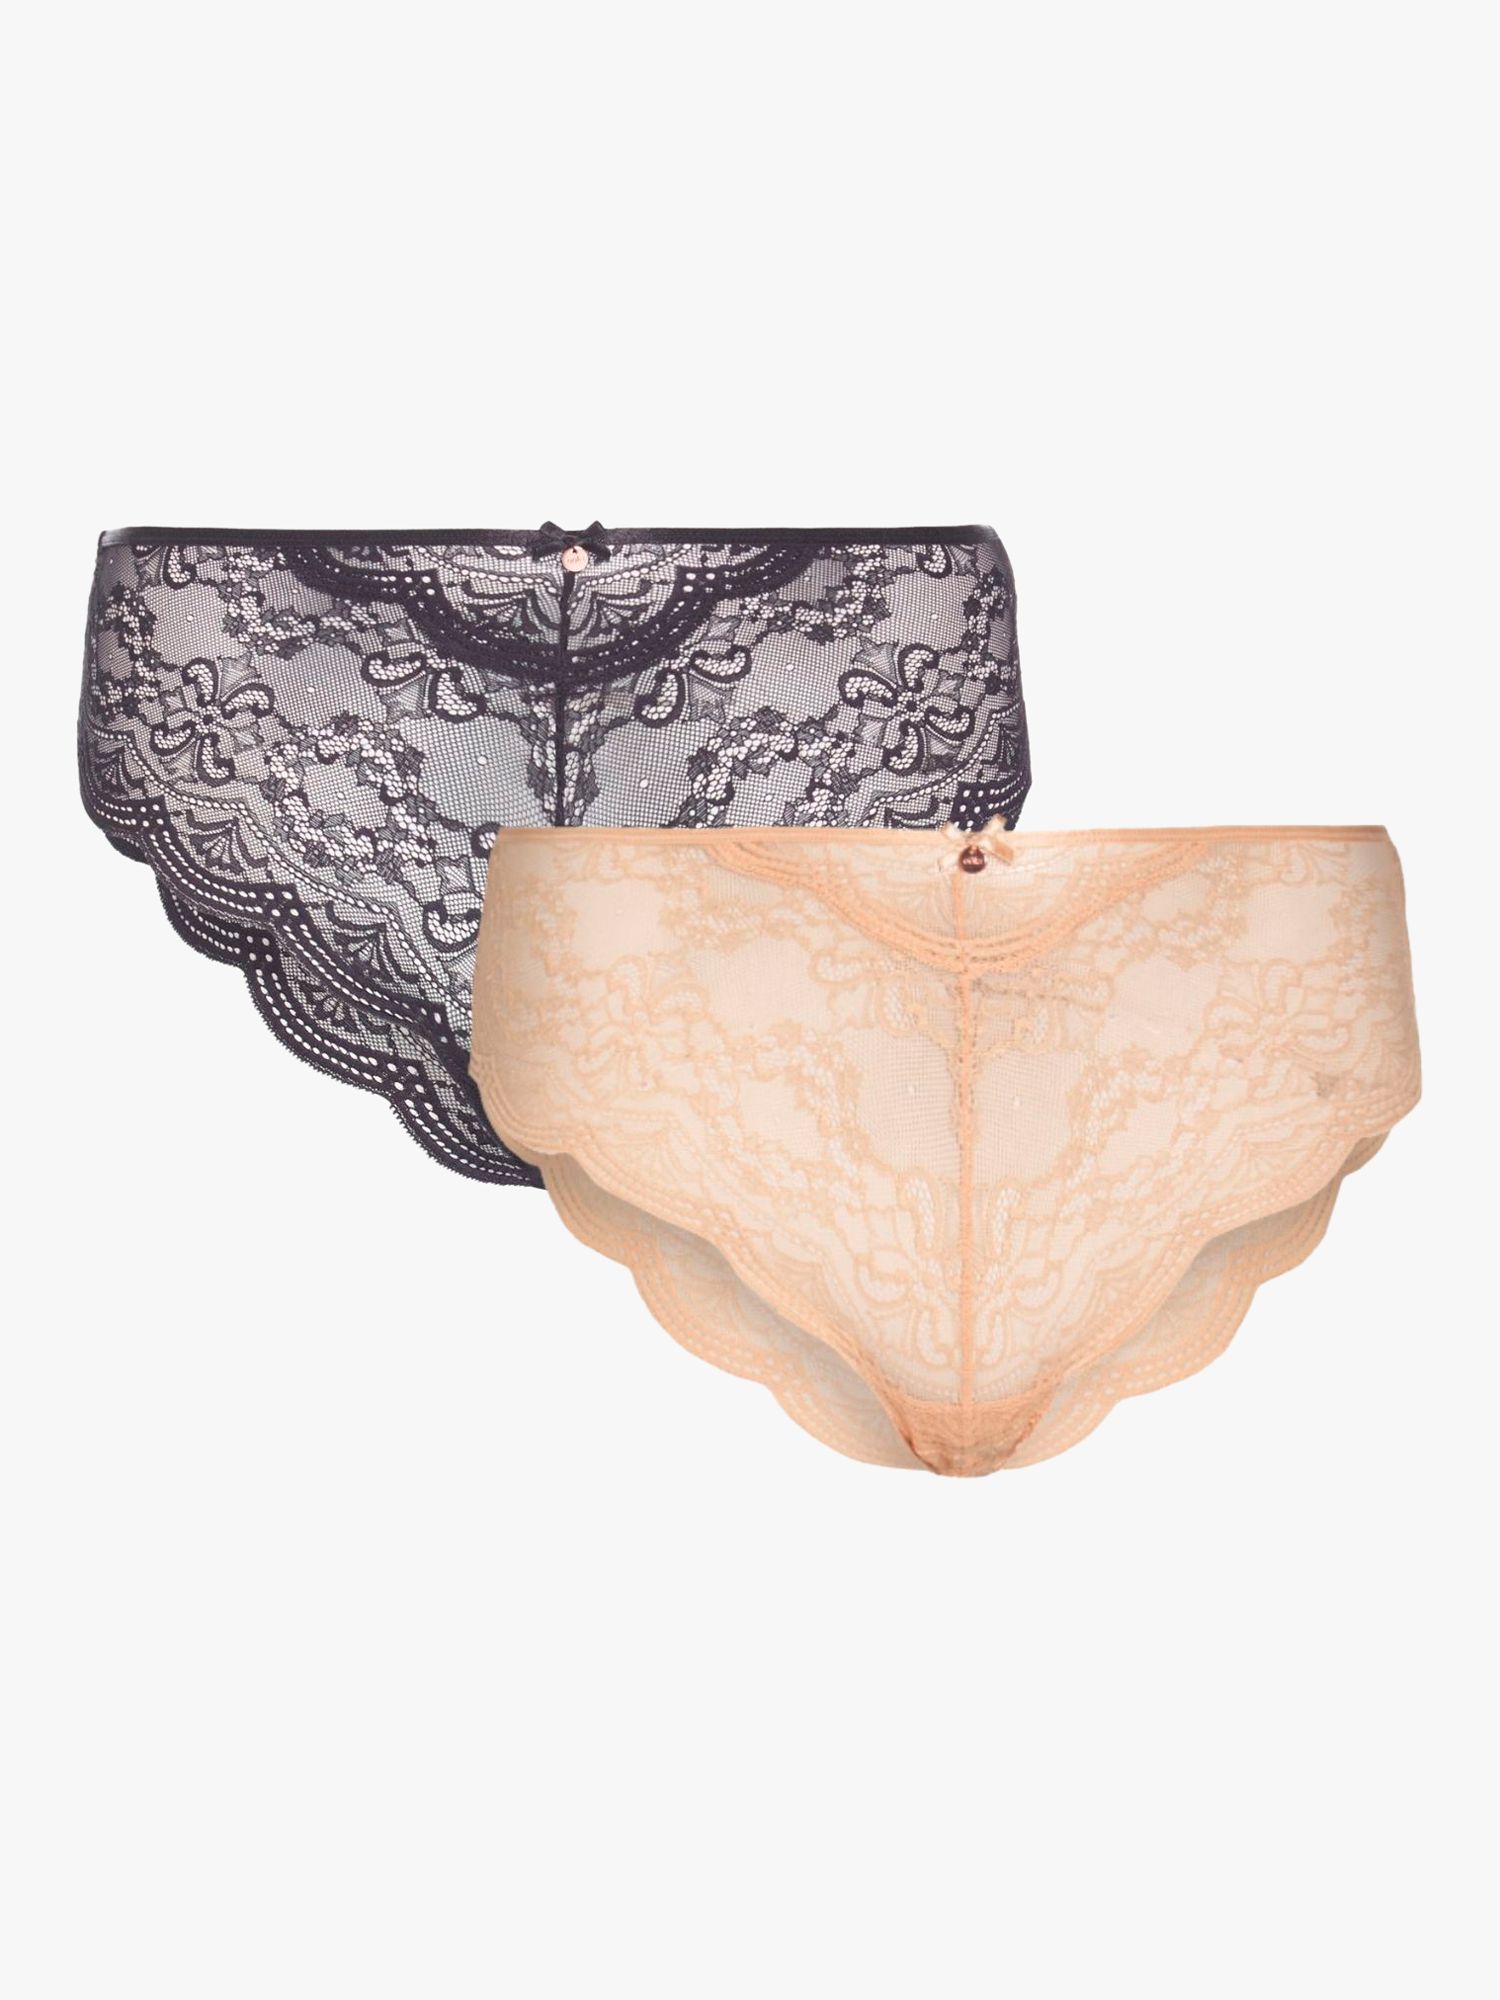 Oola Lingerie Scallop Lace Knickers, Pack of 2, Black/Latte, 14-16